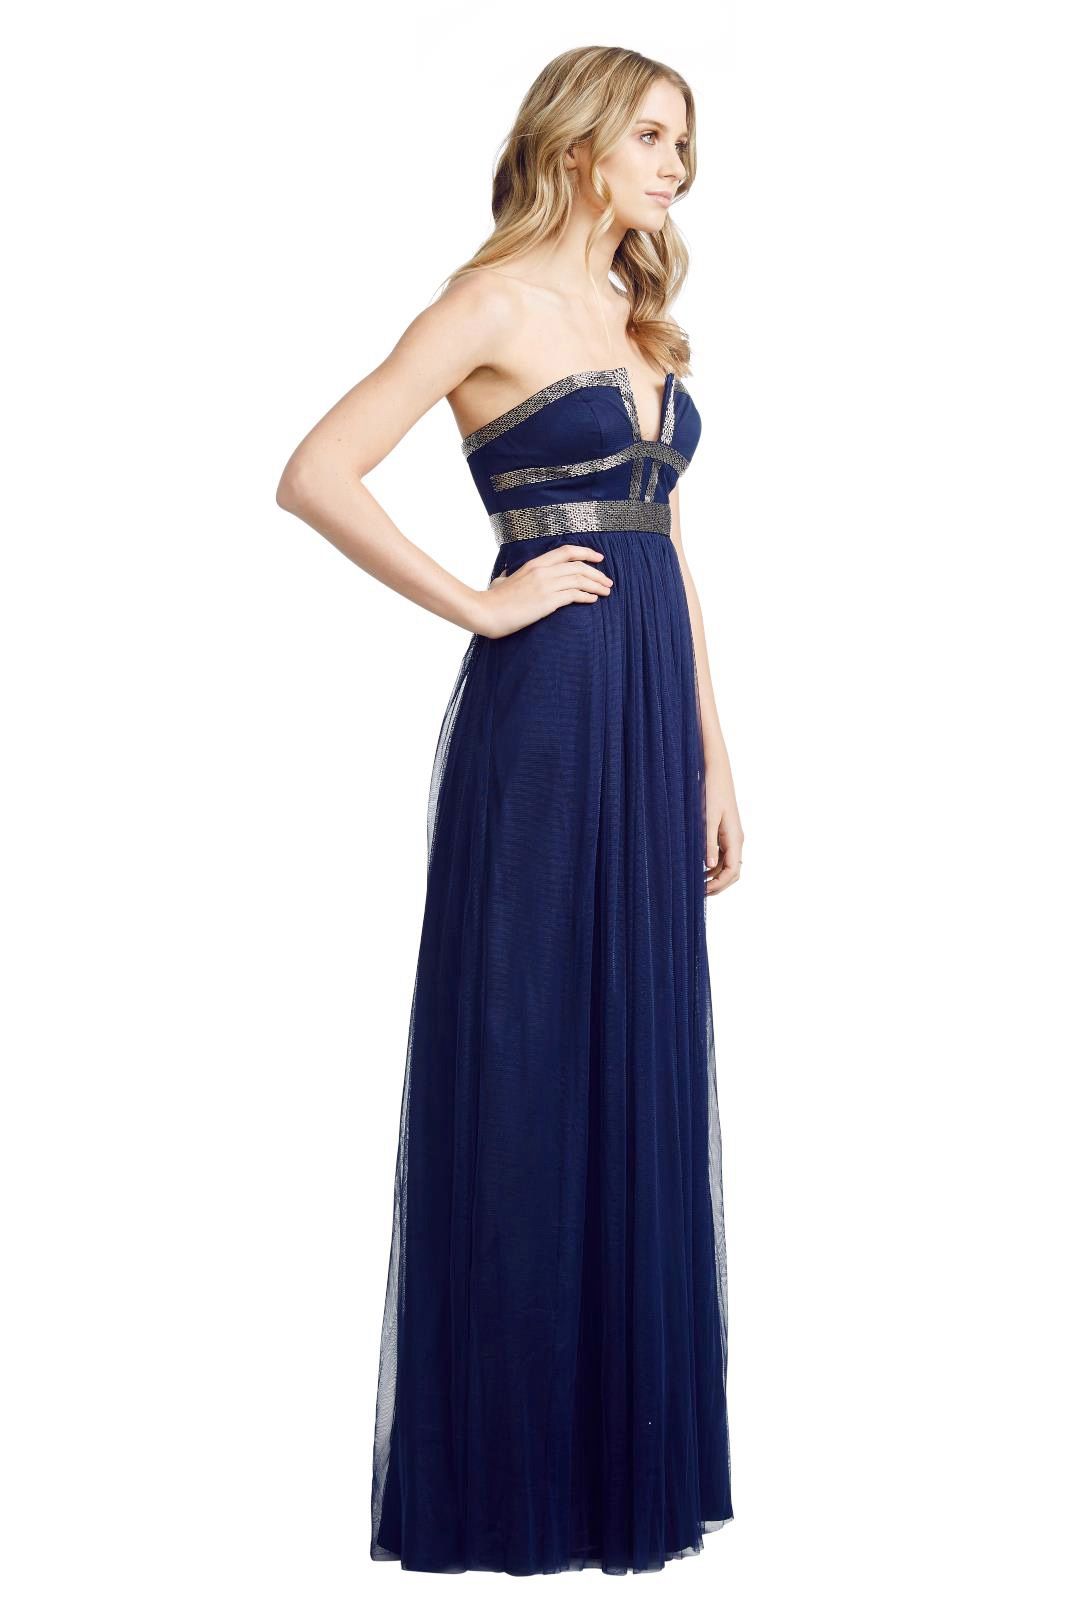 George - Hailey Gown - Blue - Side